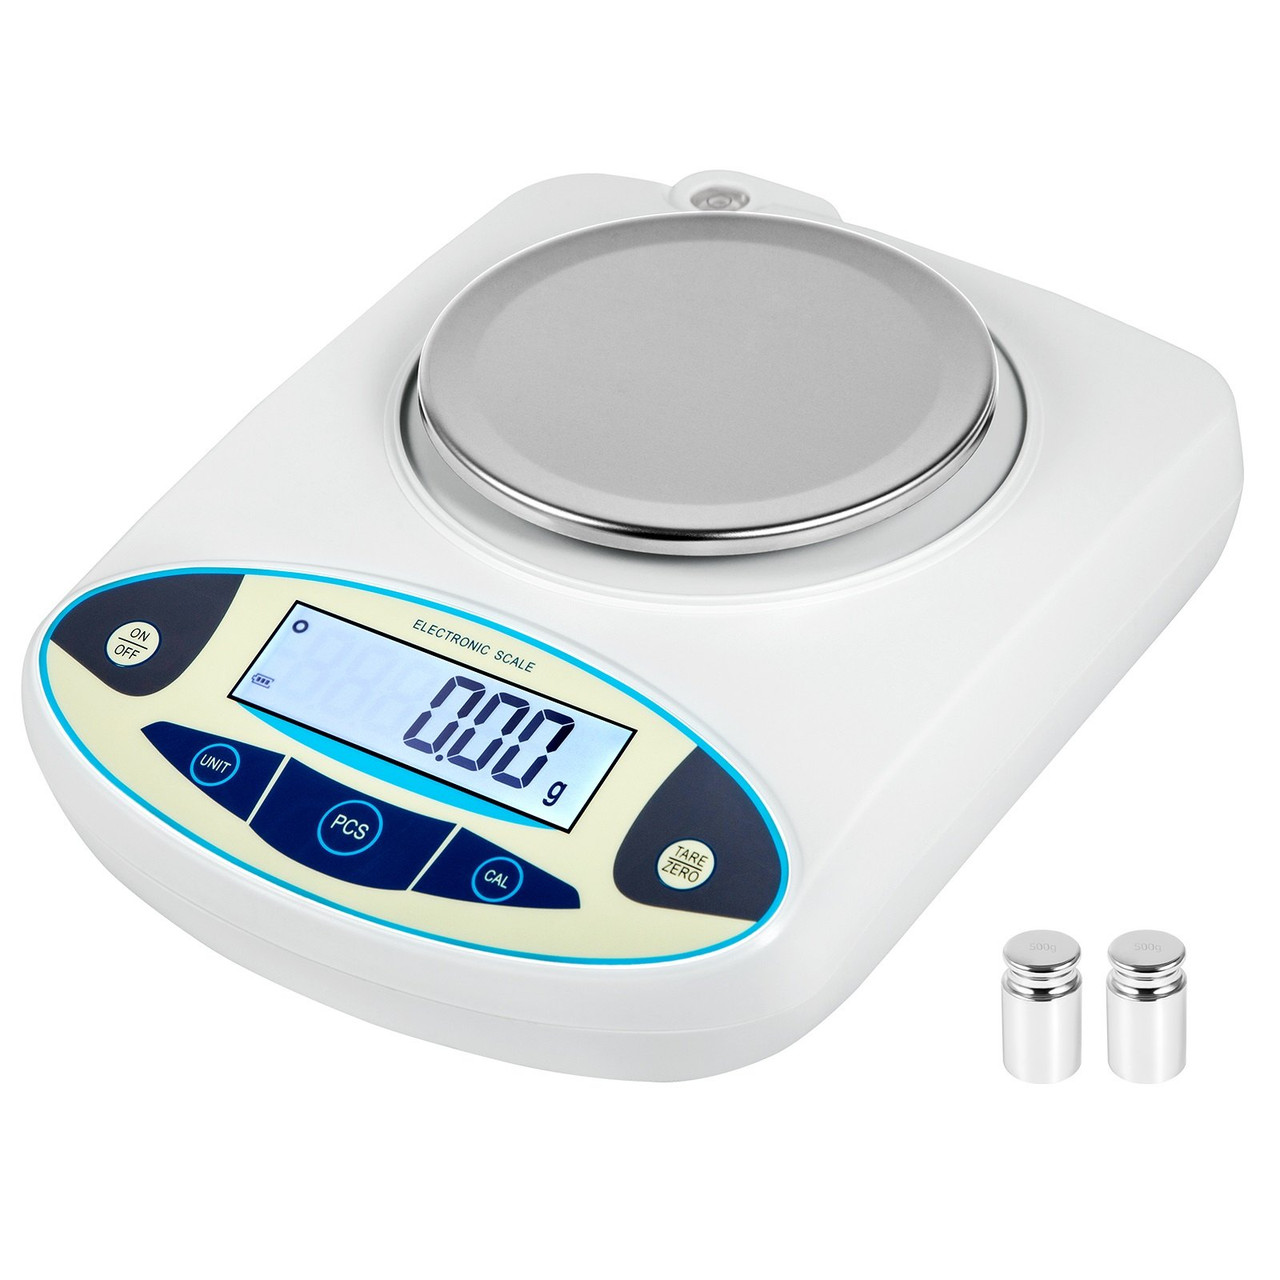 Lab Scale Analytical Balance, 3000g x 0.01g Accuracy High Precision Lab Scale 13 Units Conversion Scientific Digital Laboratory Balance Scale for Lab, Jewelry, Industrial, Business(3000g, 0.01g)